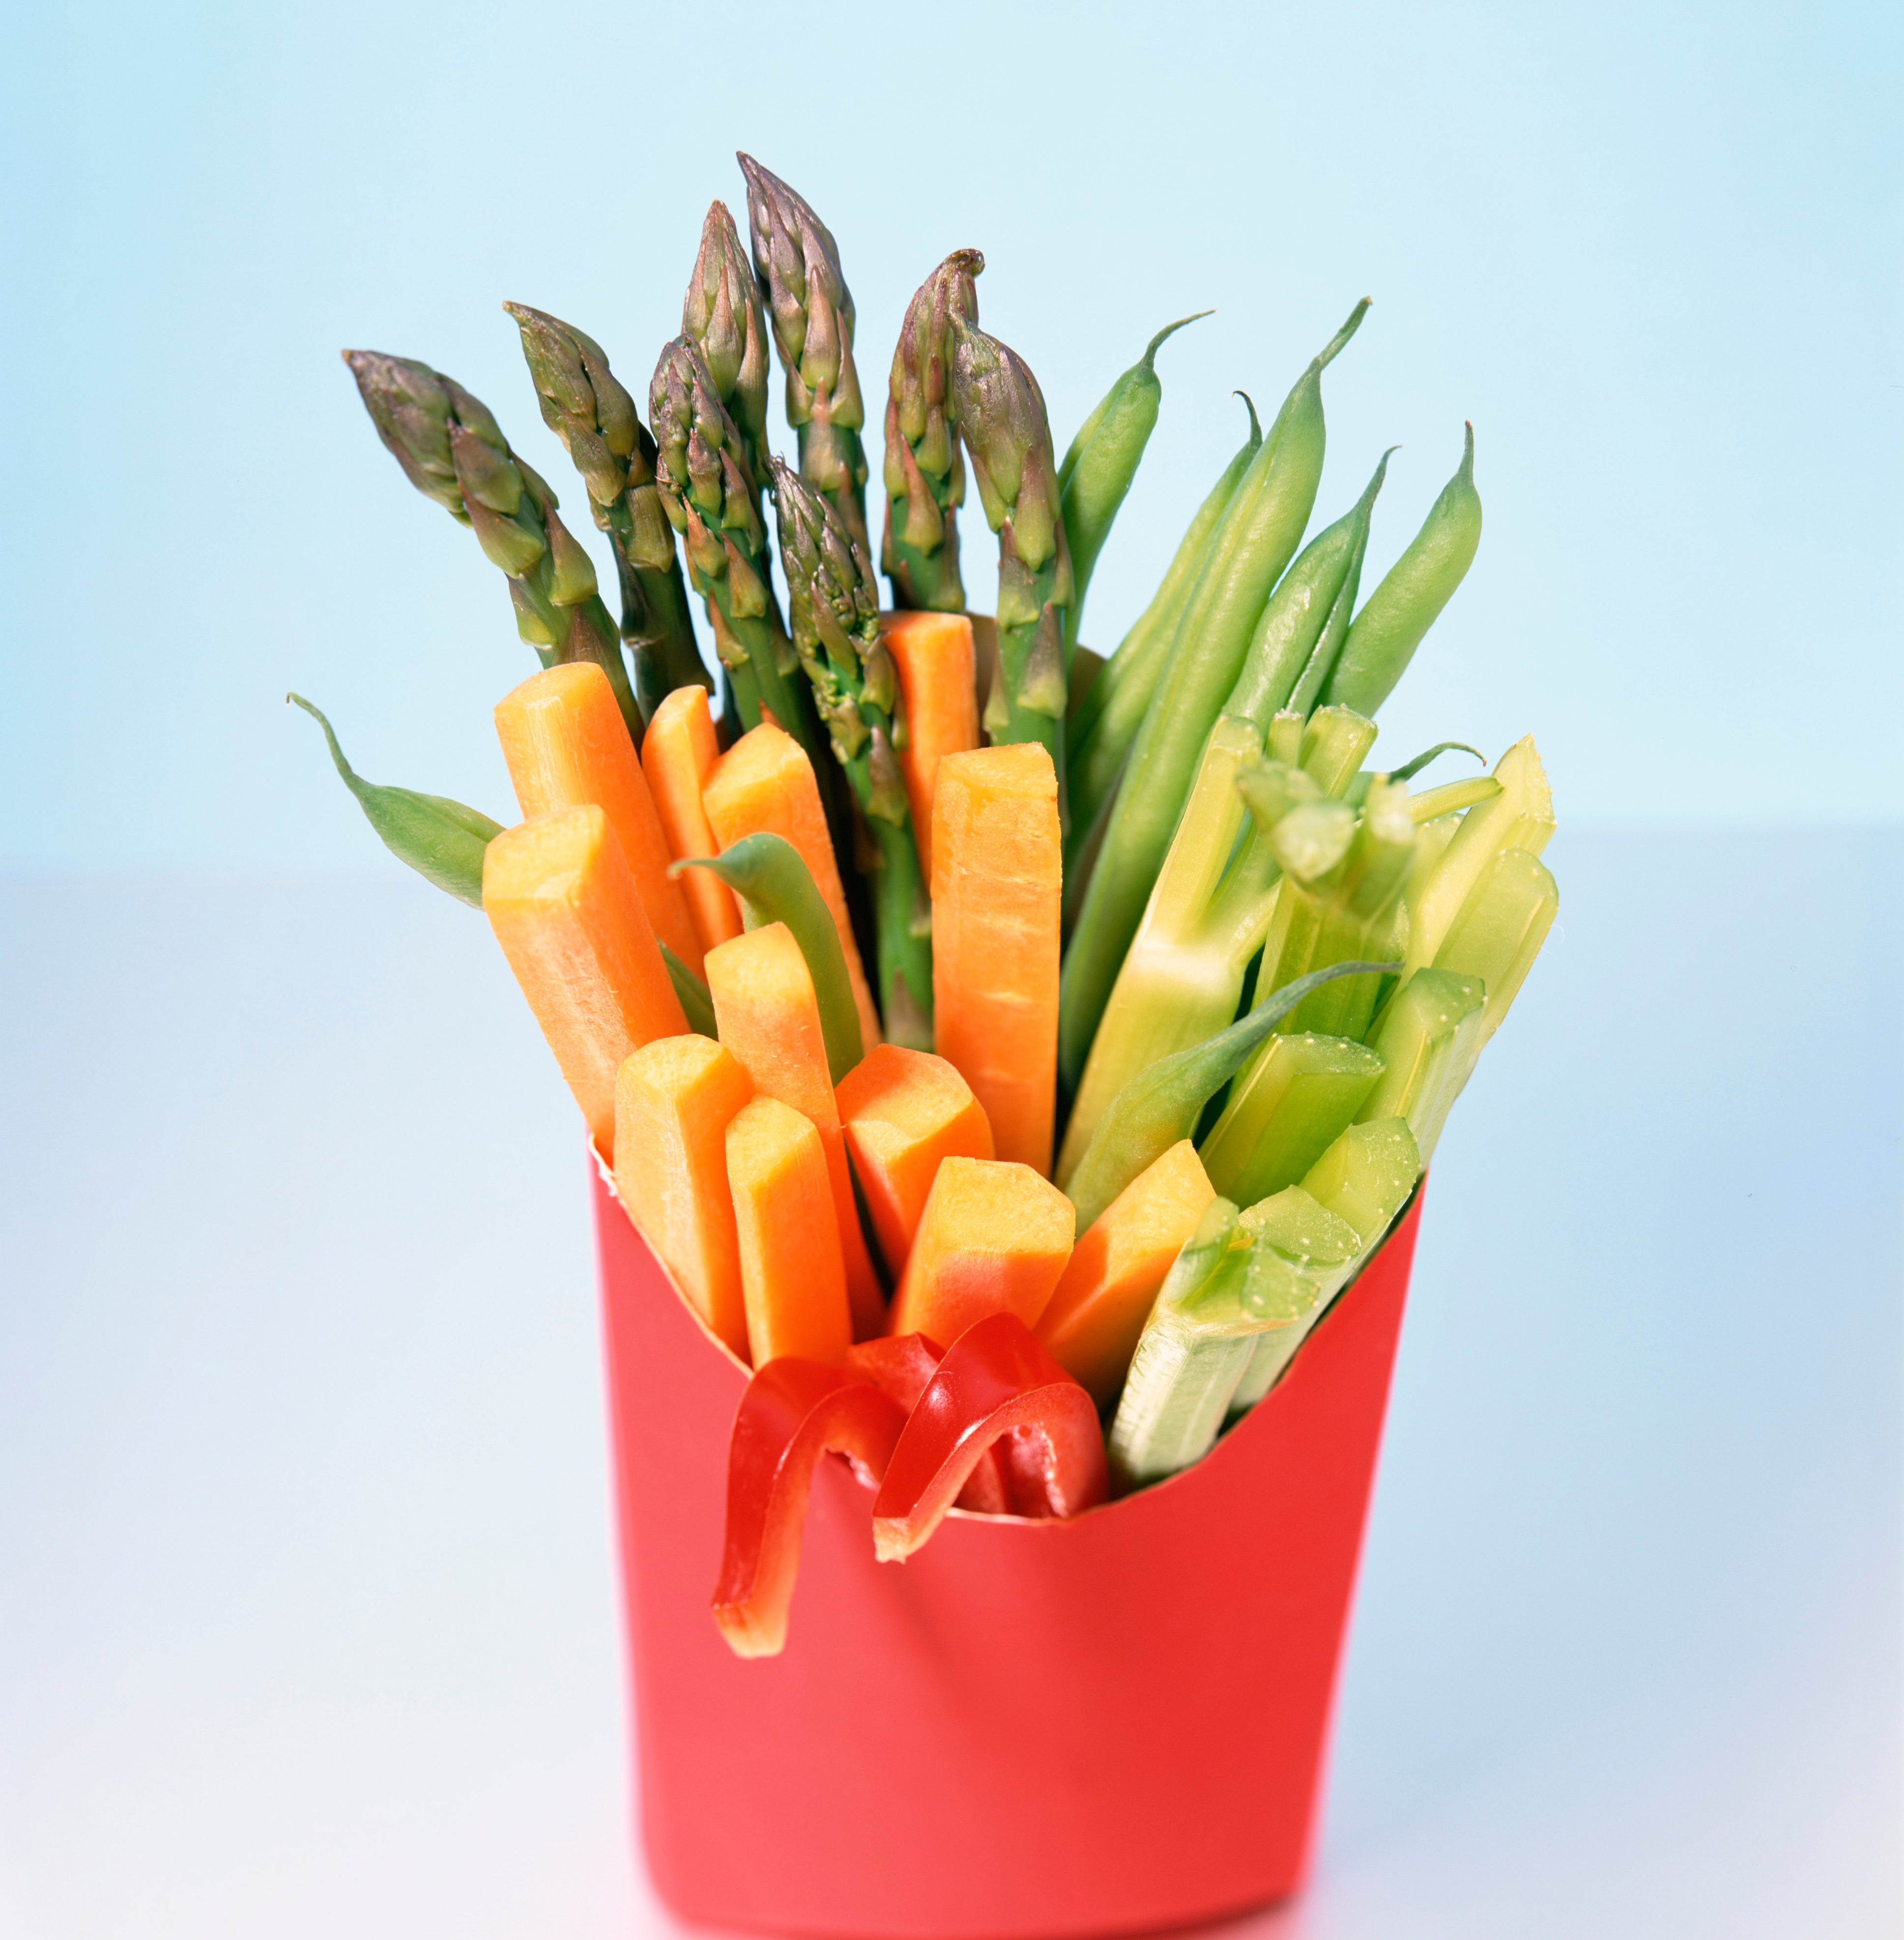 A bouquet of various cut vegetables, including asparagus, presented in a red fast-food container